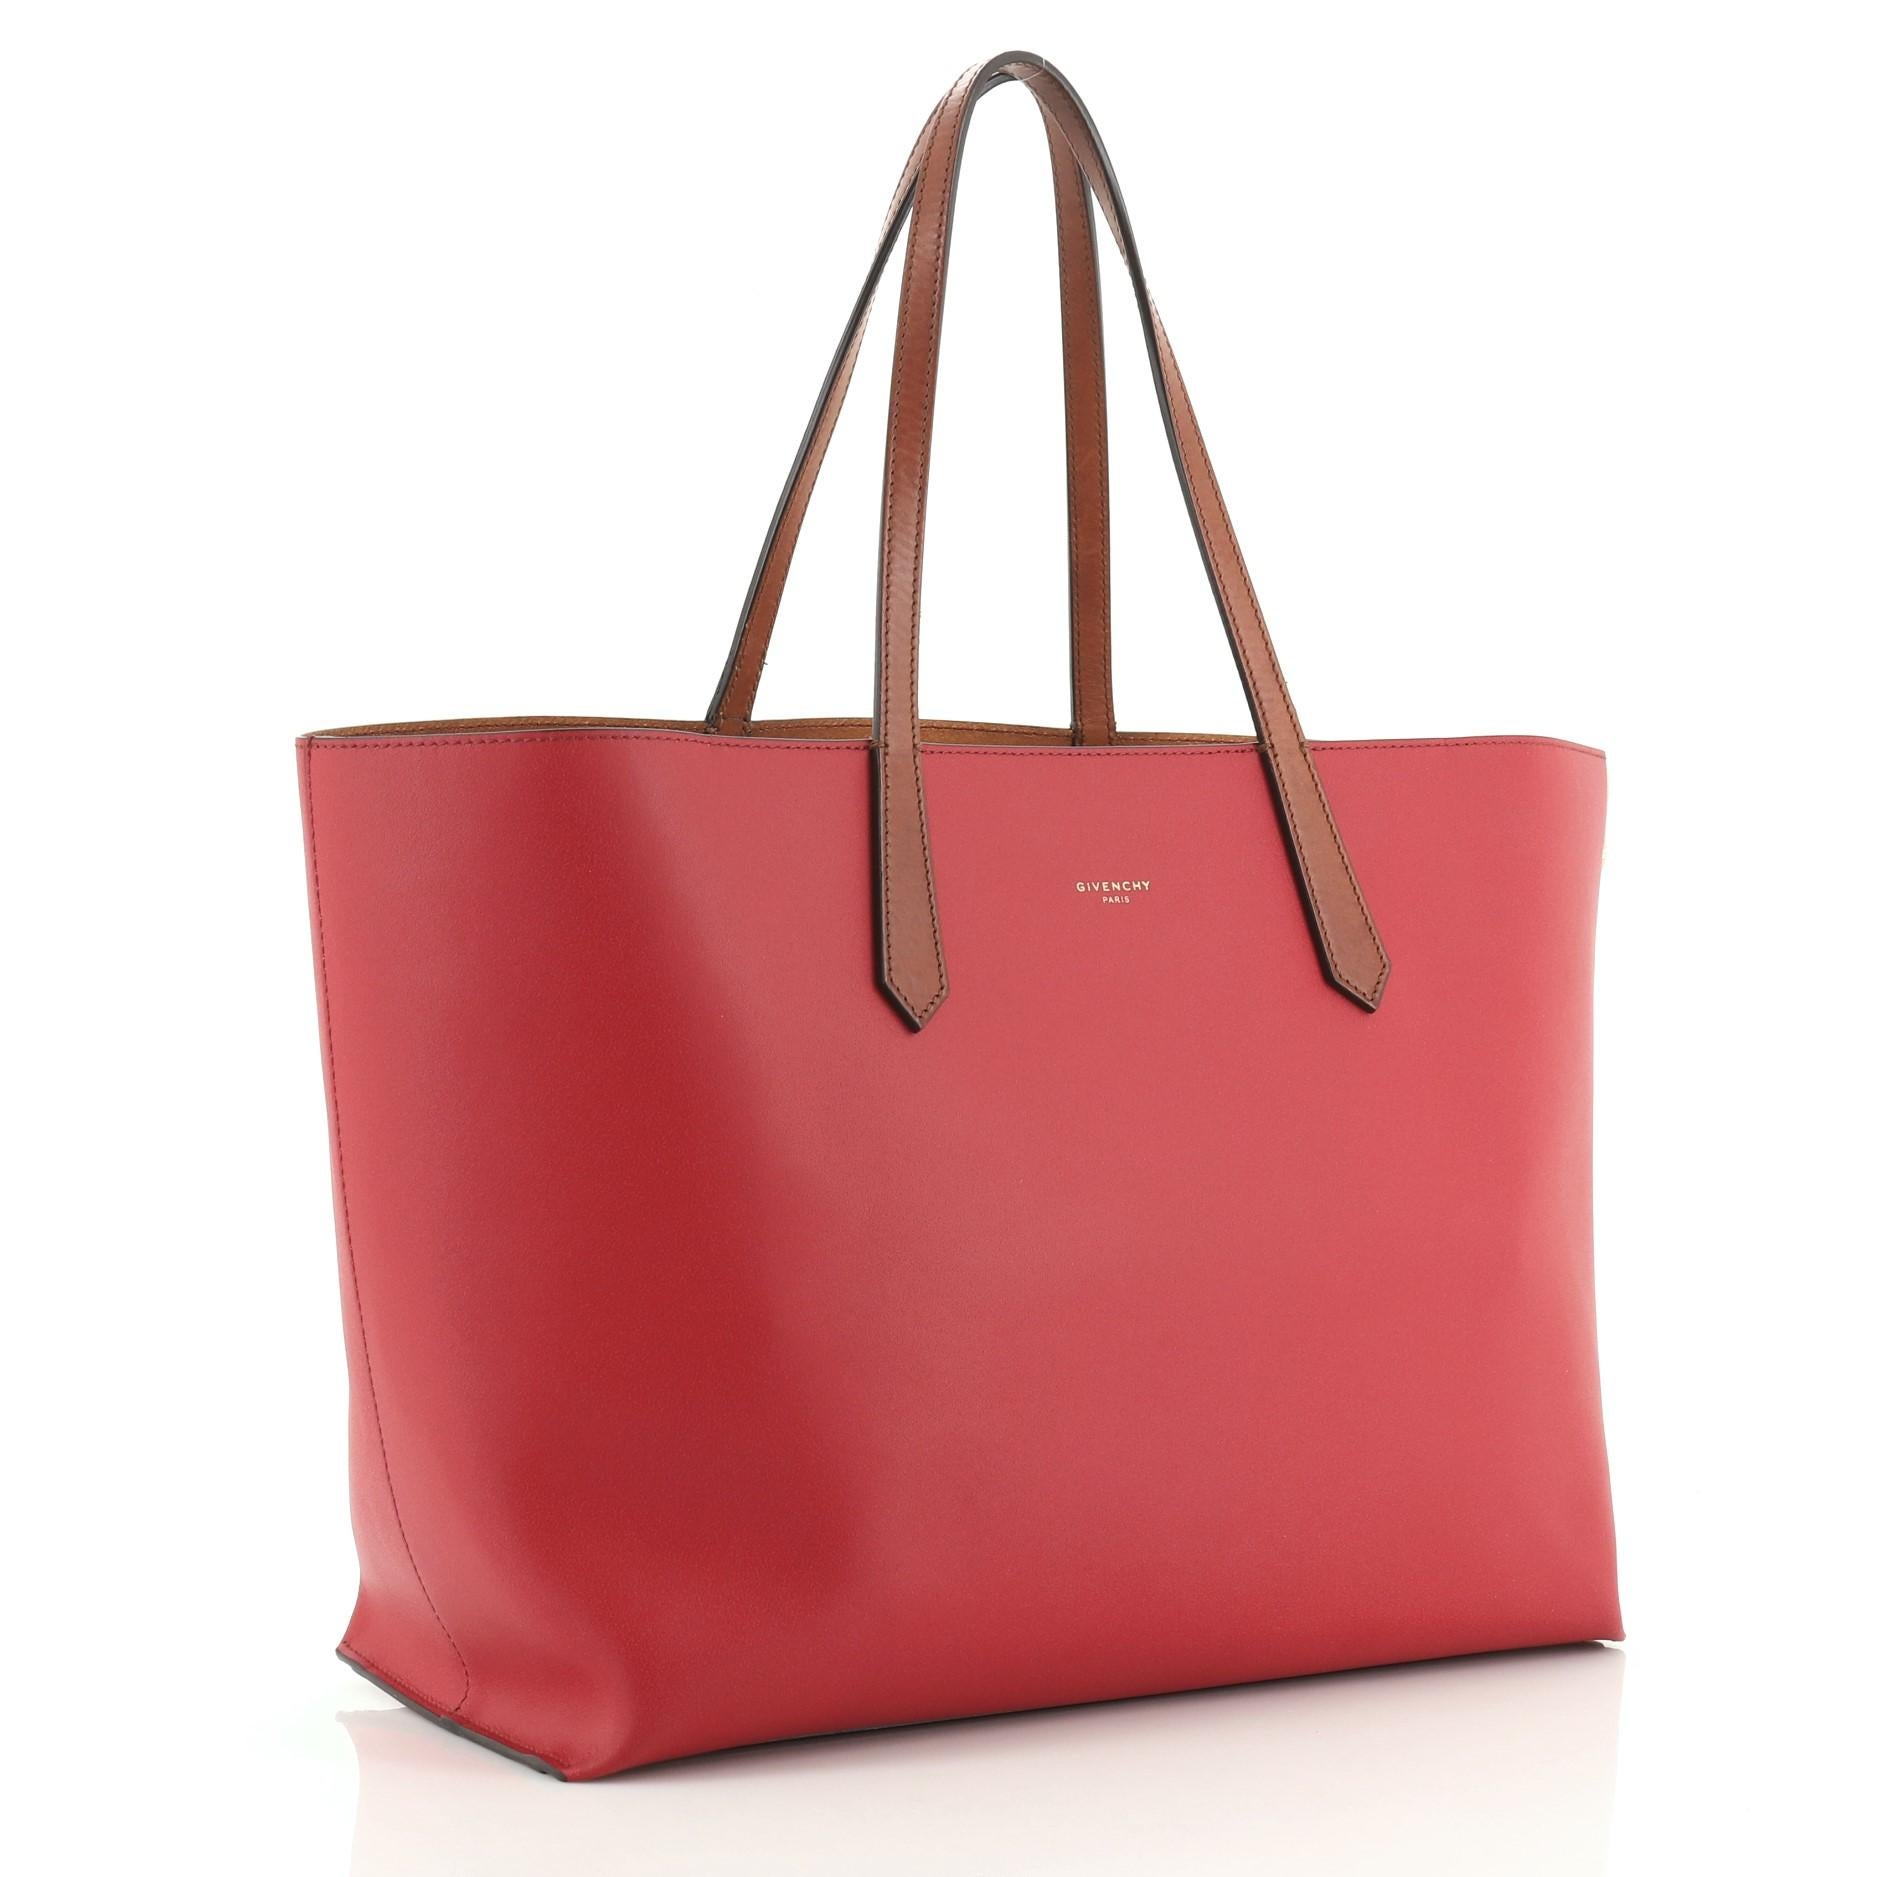 This Givenchy GV Tote Leather Medium, crafted in red leather, features dual slim leather handles and gold-tone hardware. Its wide open top showcases a gold leather interior with slip pocket.

Condition: Great. Minor wear on exterior, darkening, wear